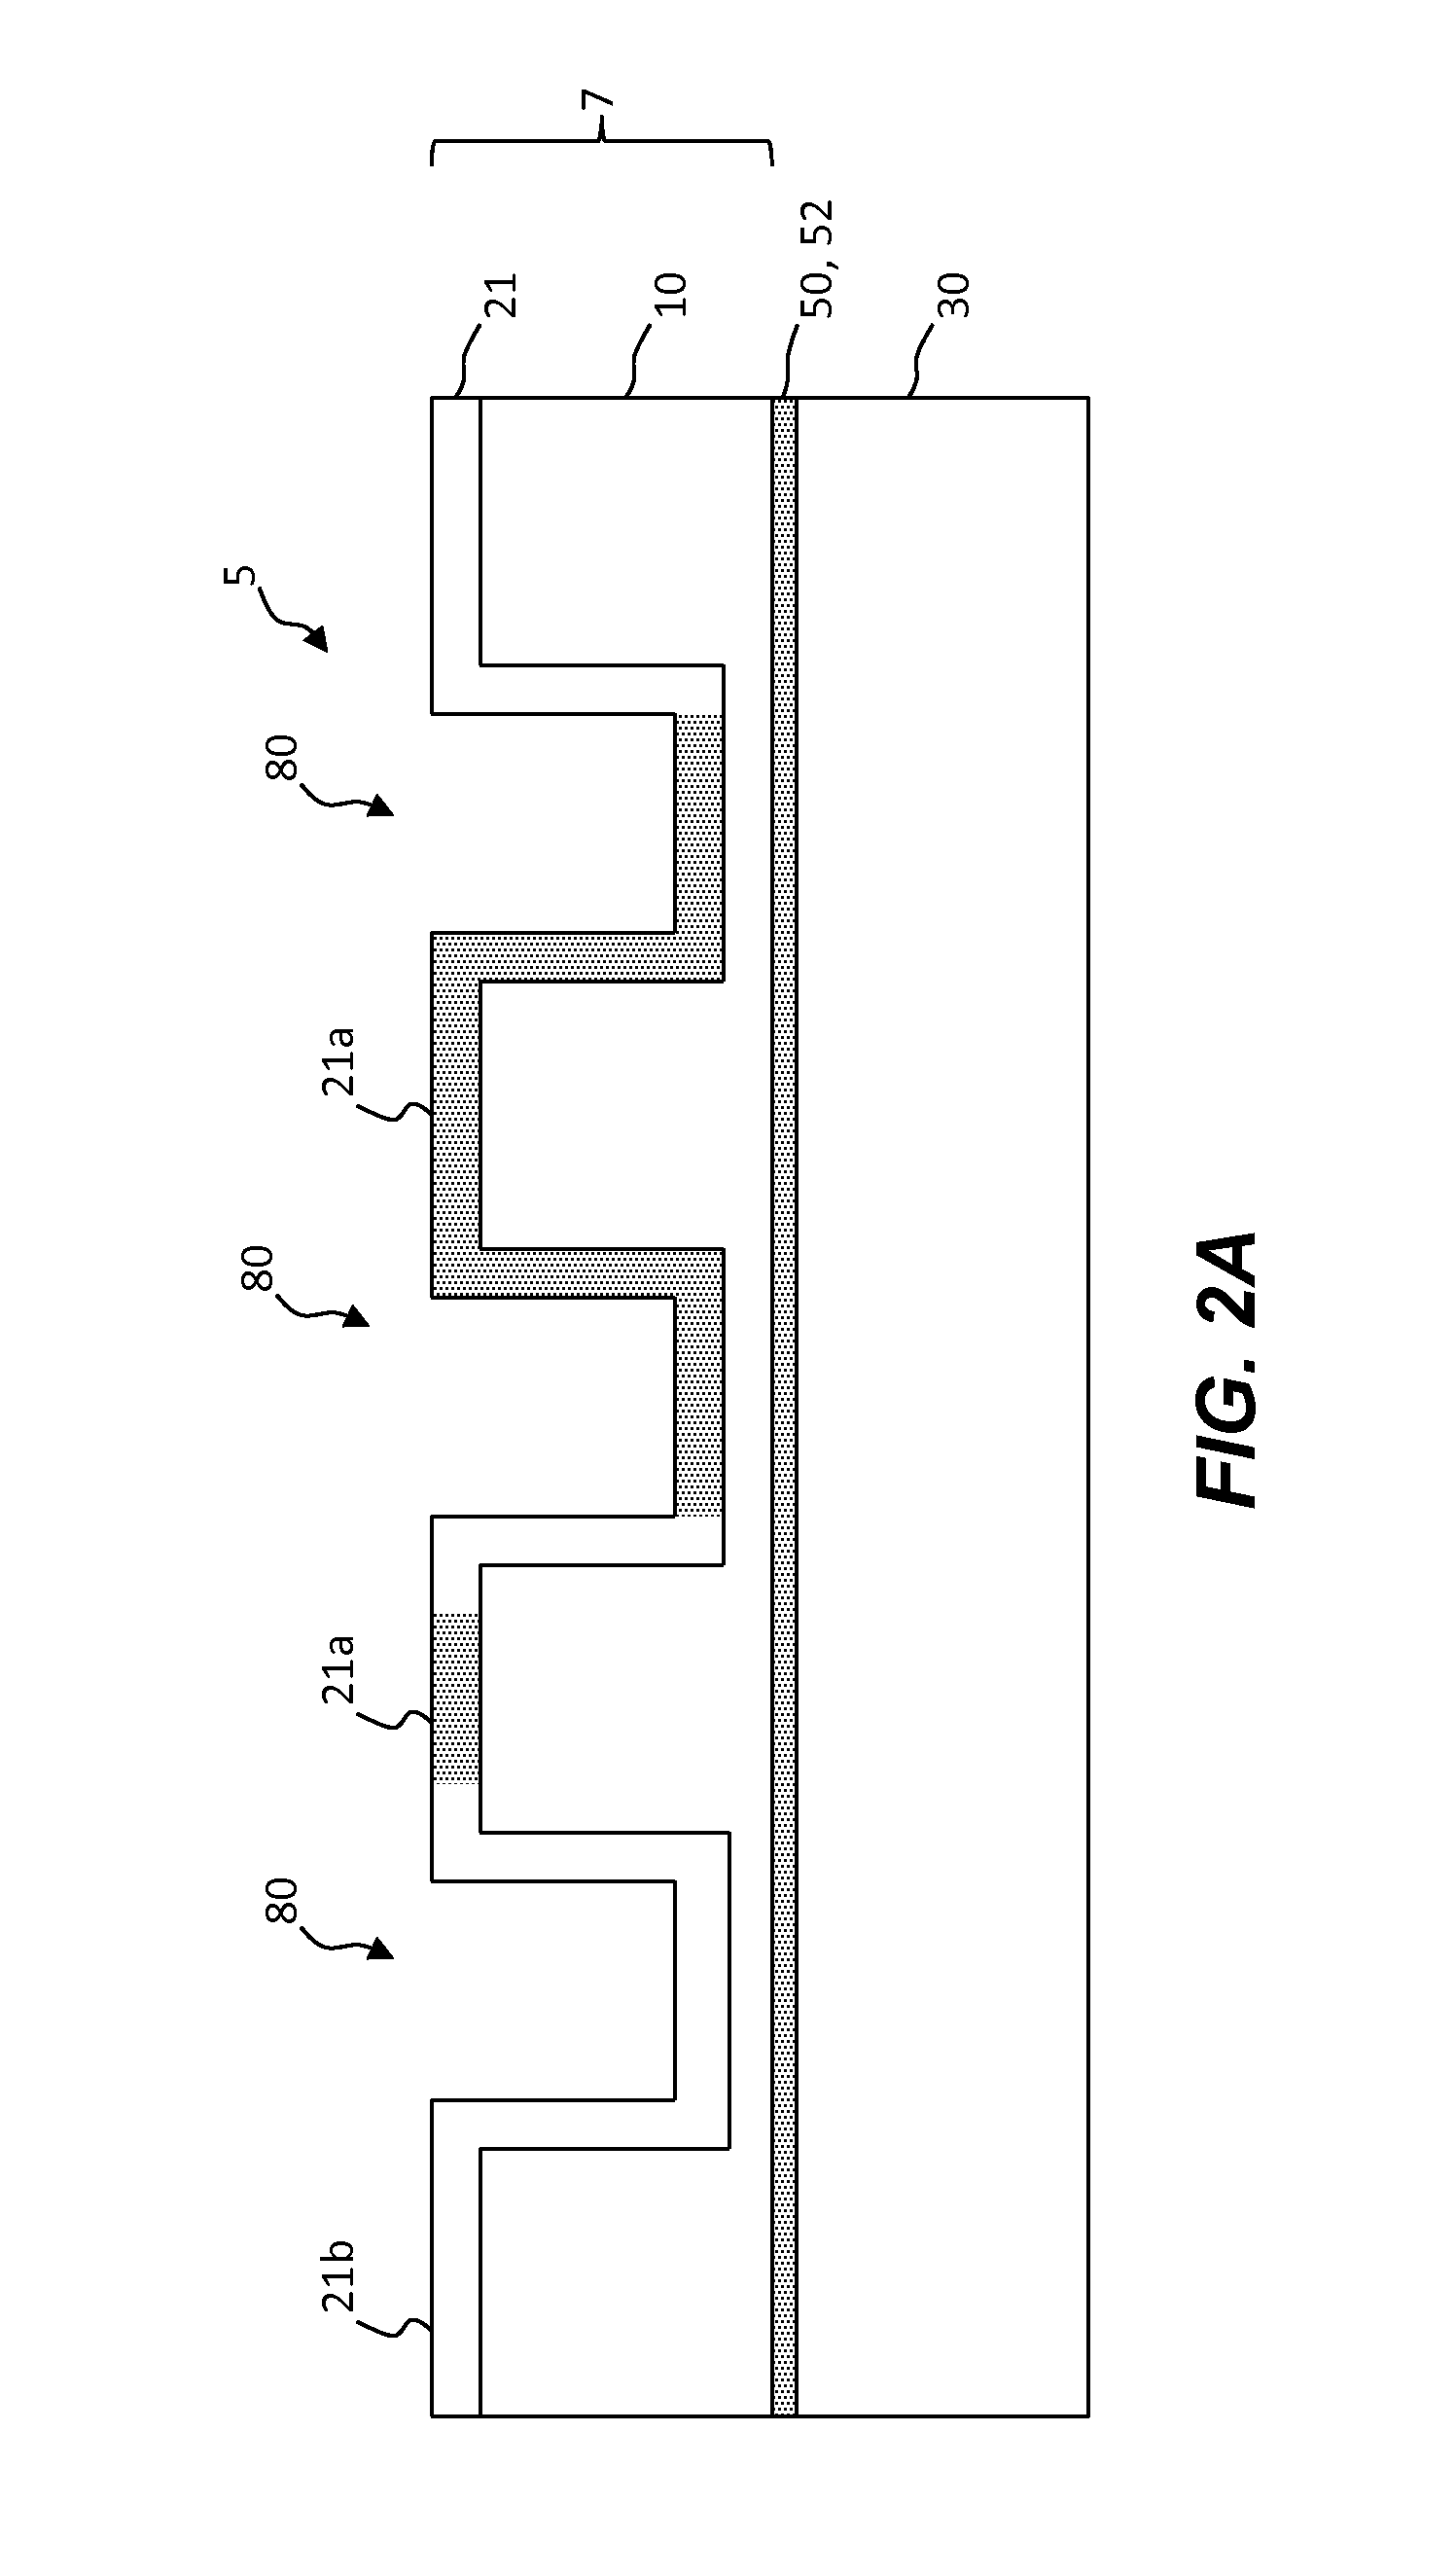 Making imprinted multi-layer biocidal particle structure